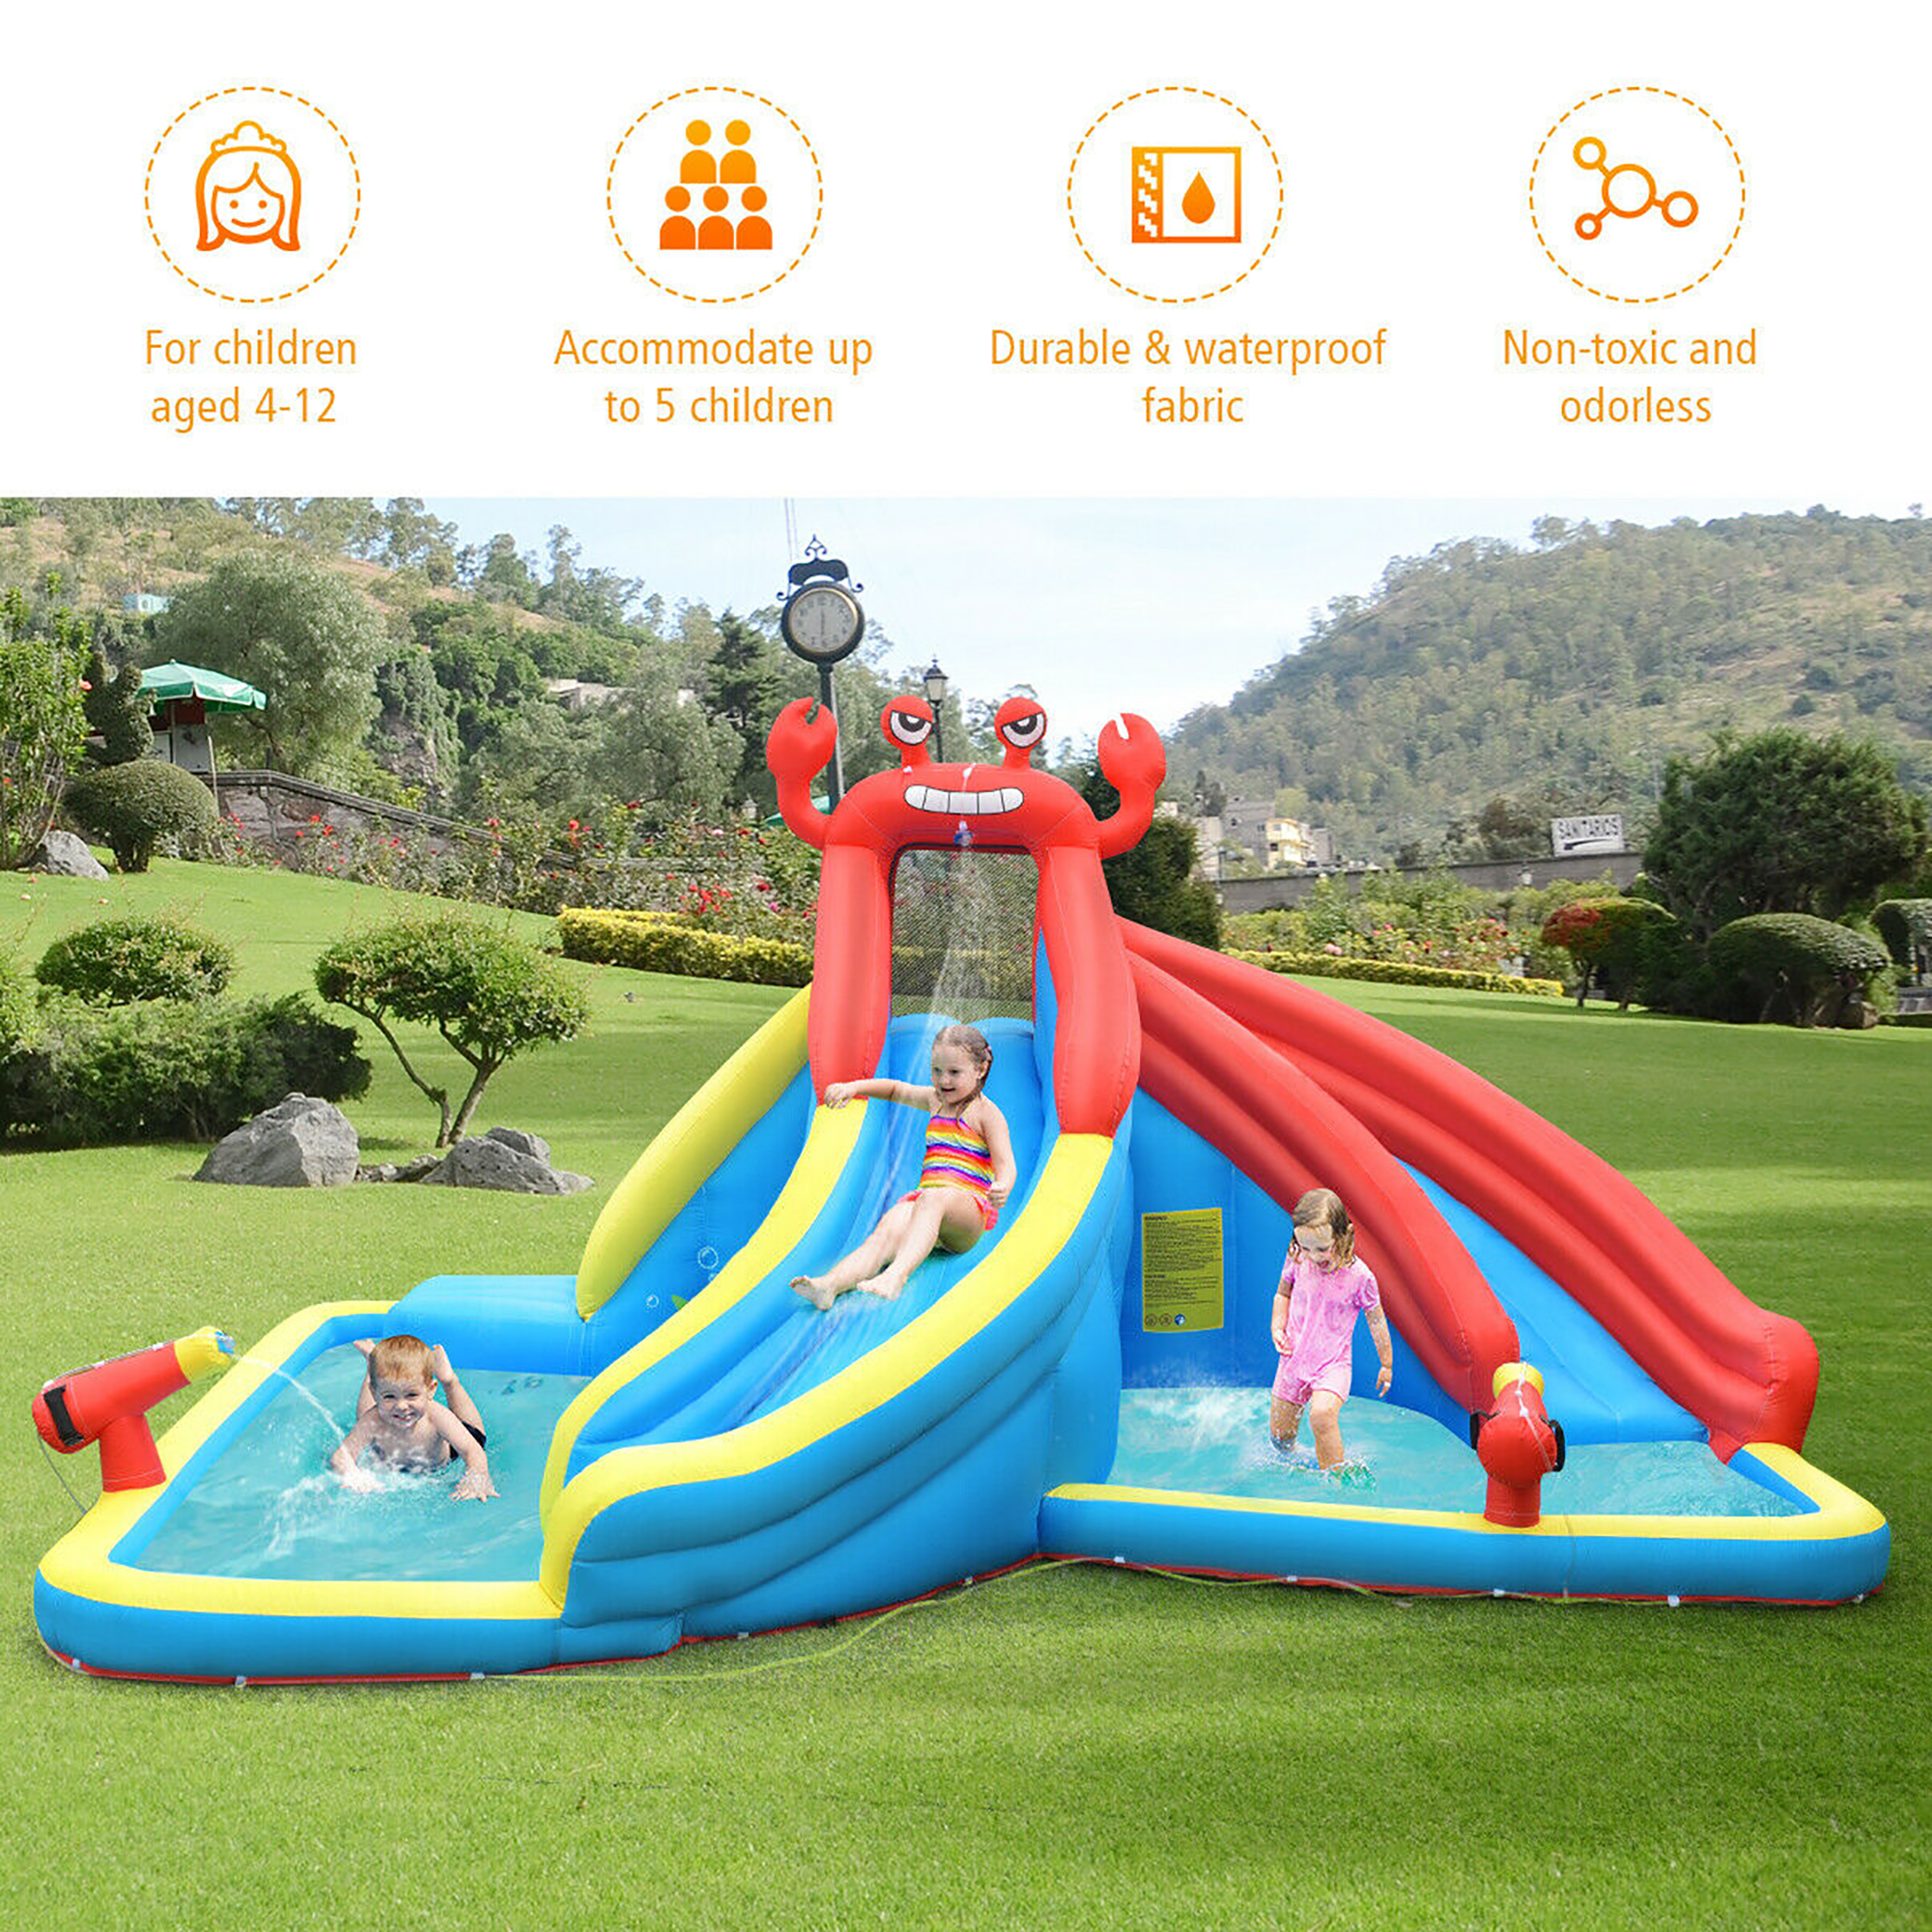 Costway Inflatable Water Slide Crab Dual Slide Bounce House Splash Pool Without Blower - image 5 of 10